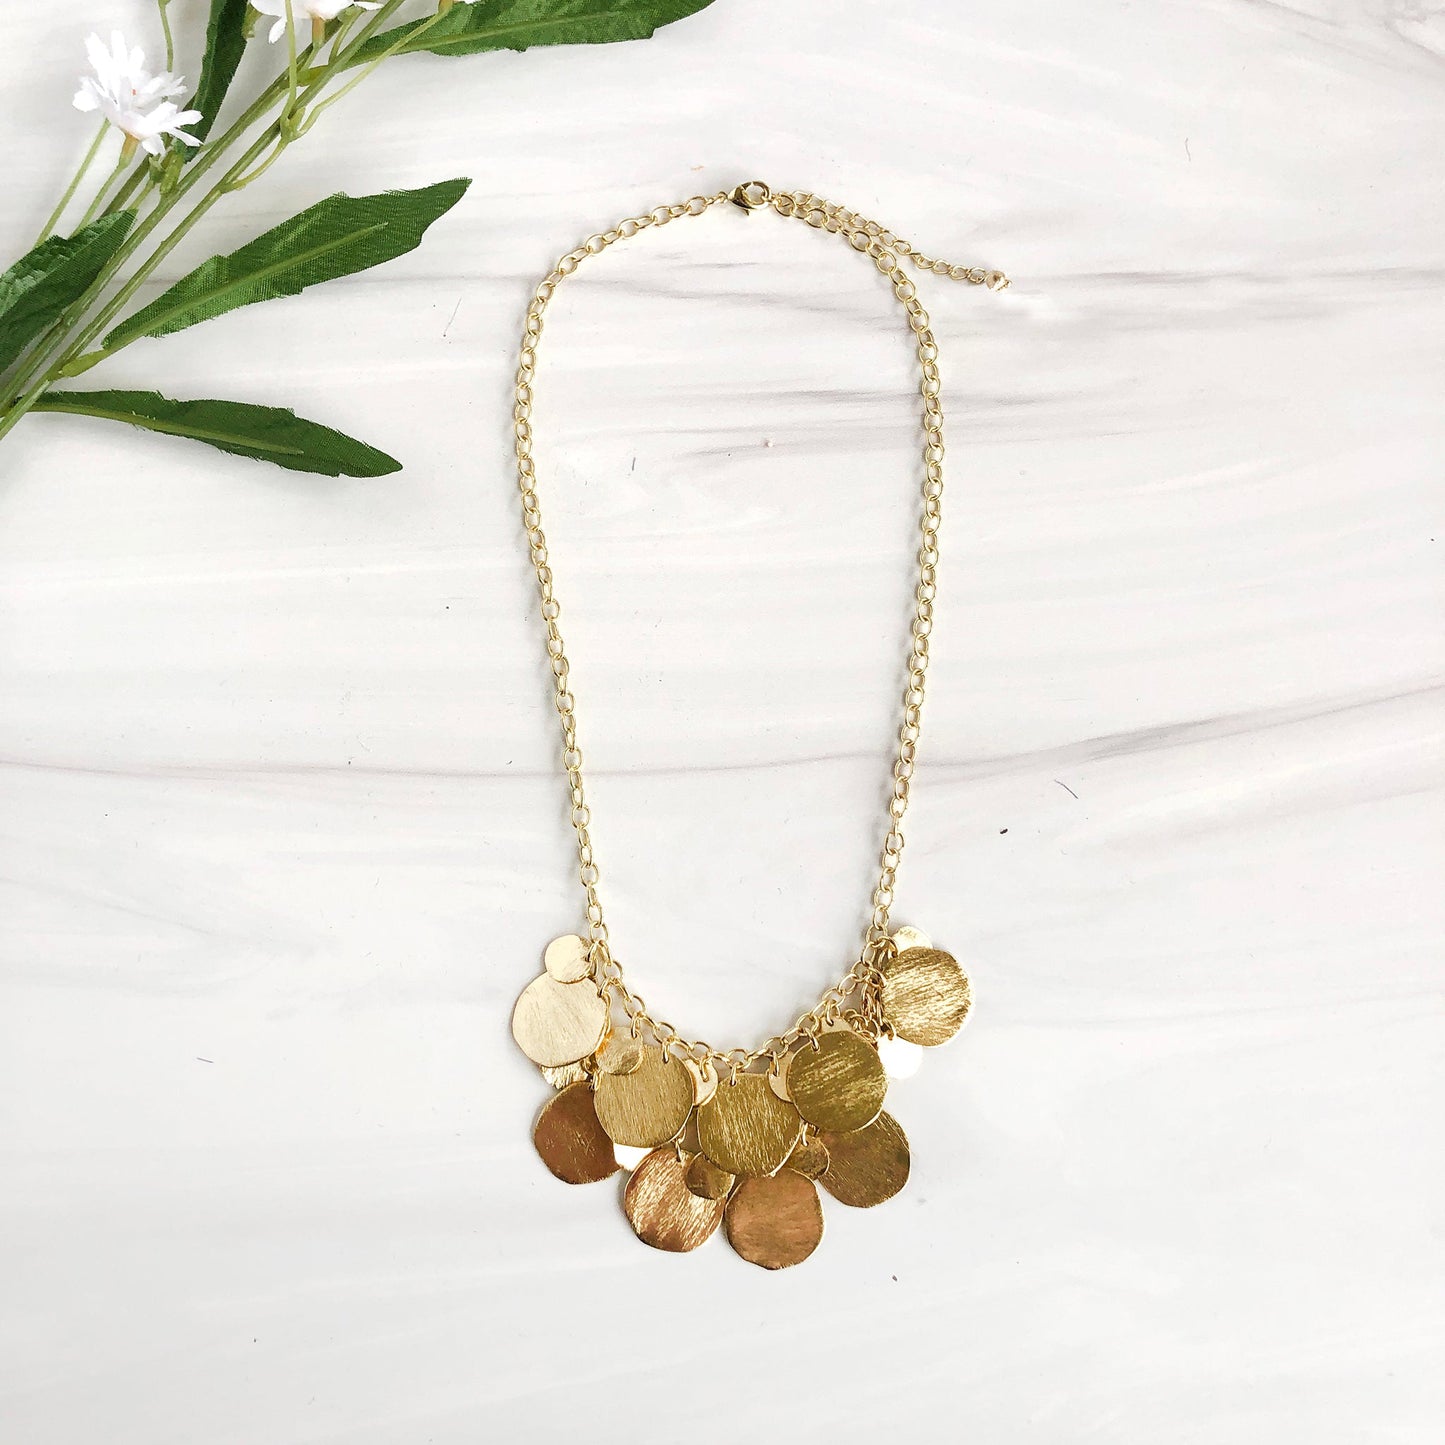 Layers of large and small handcrafted gold metal discs overlap and cascade down this glimmering pendant necklace.